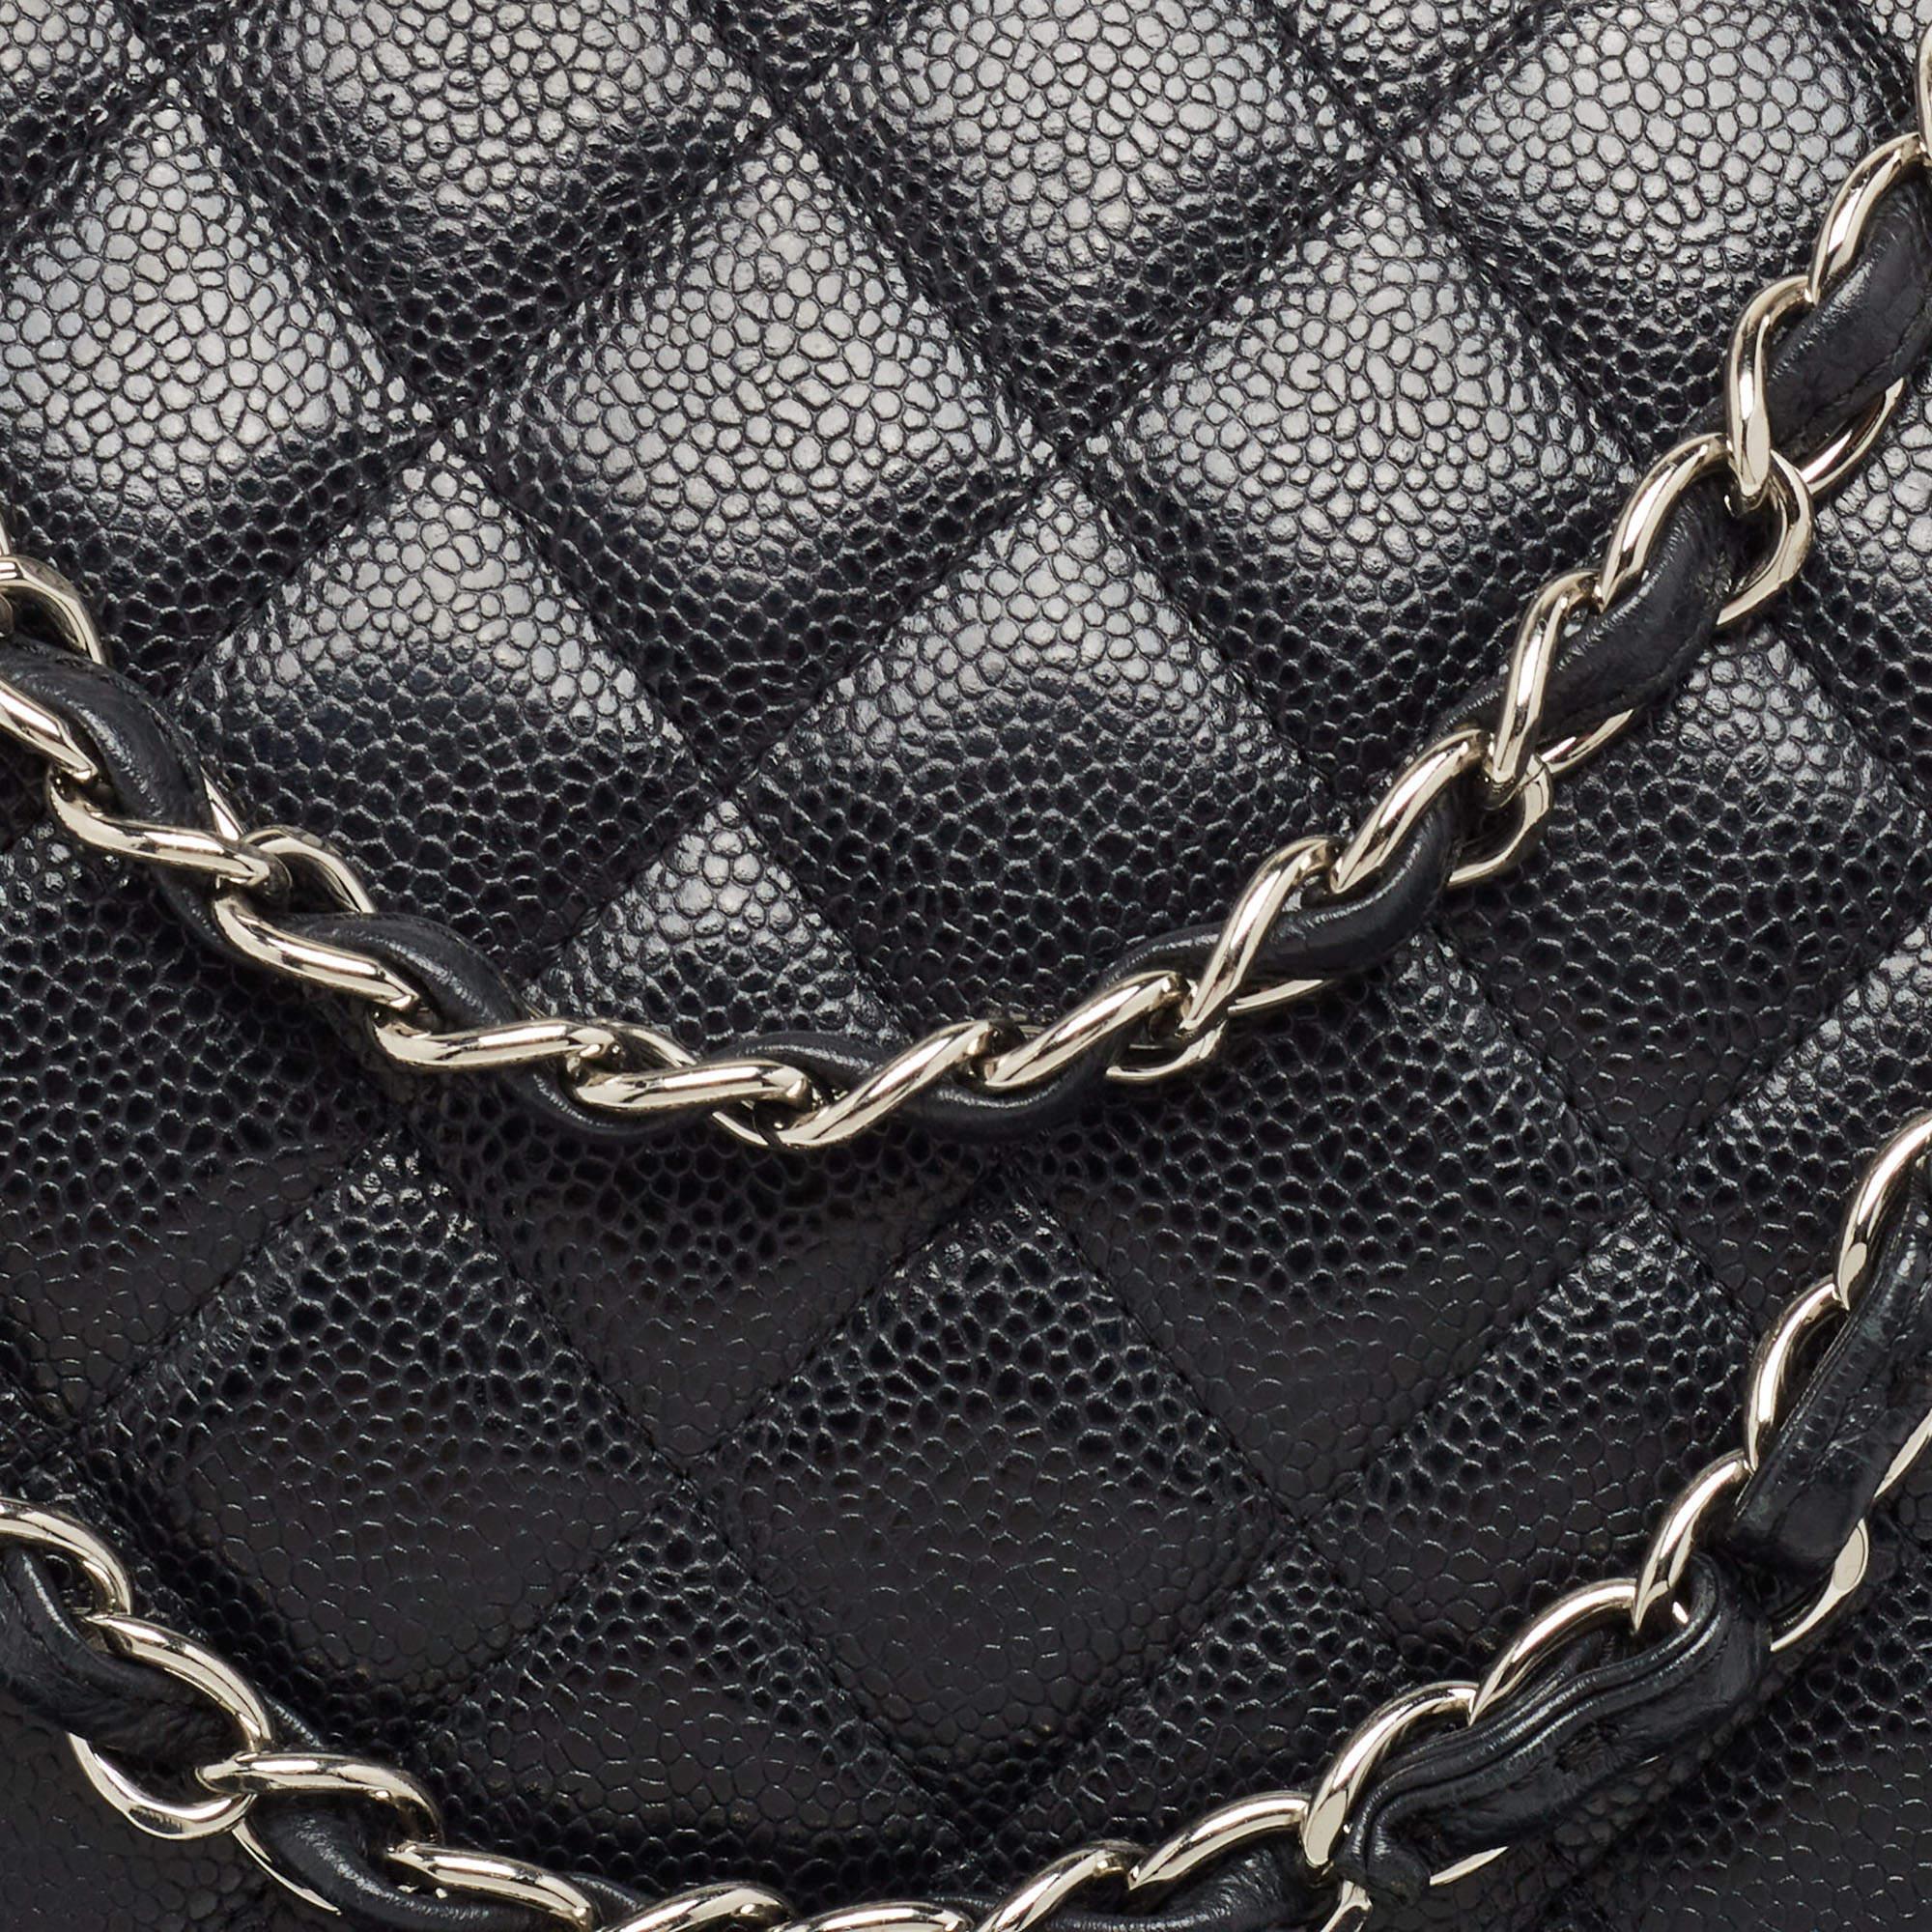 Chanel Black Quilted Caviar Leather Maxi Classic Double Flap Bag 3